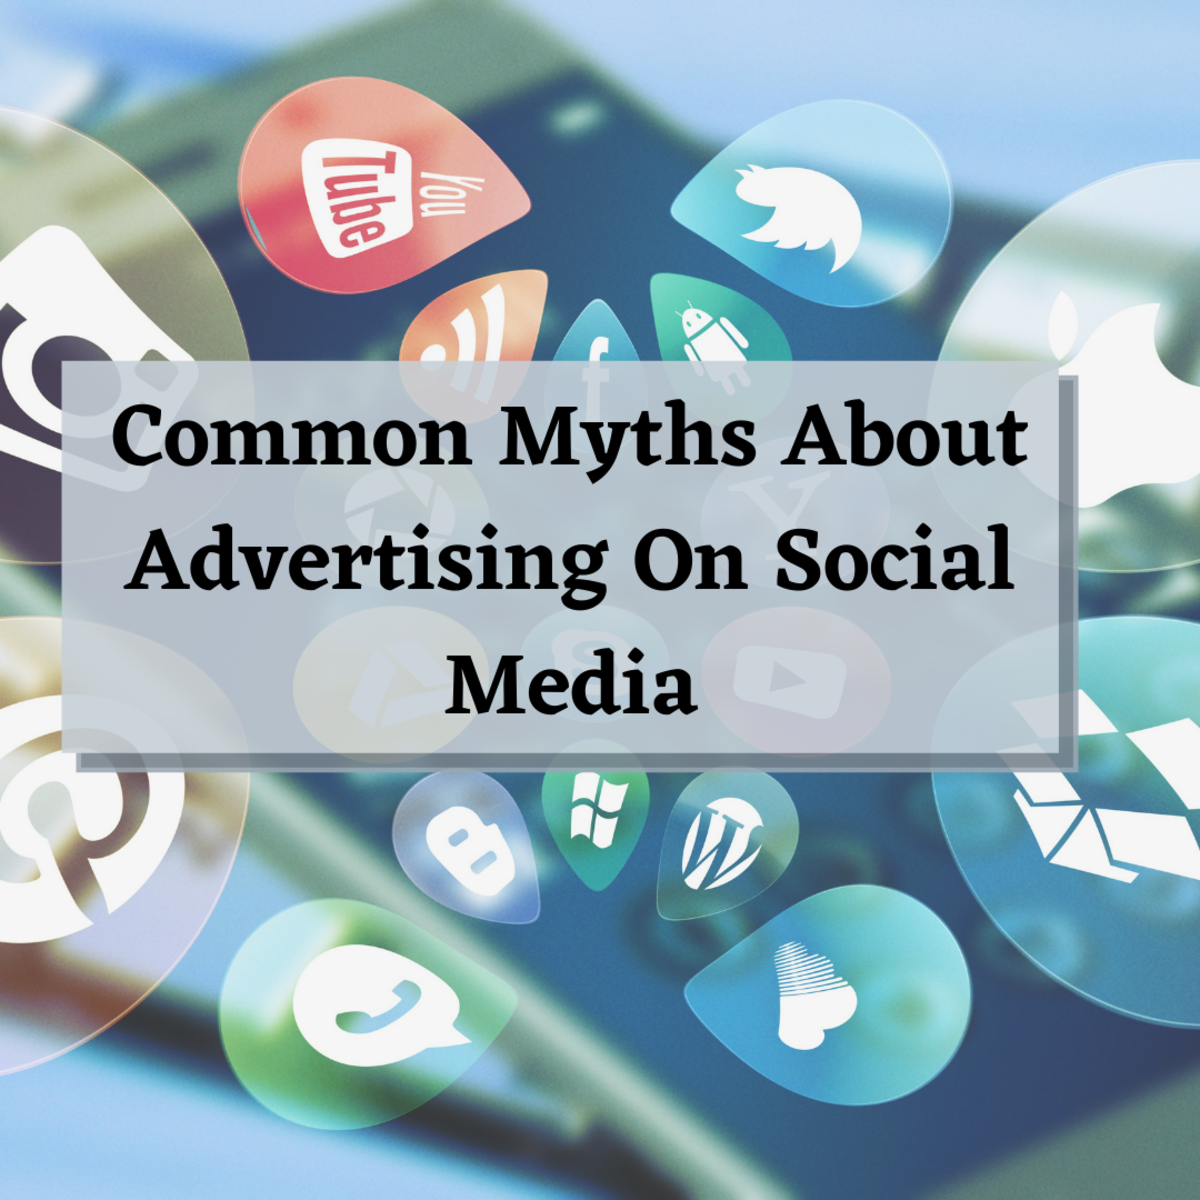 Five Common Myths About Advertising On Social Media.